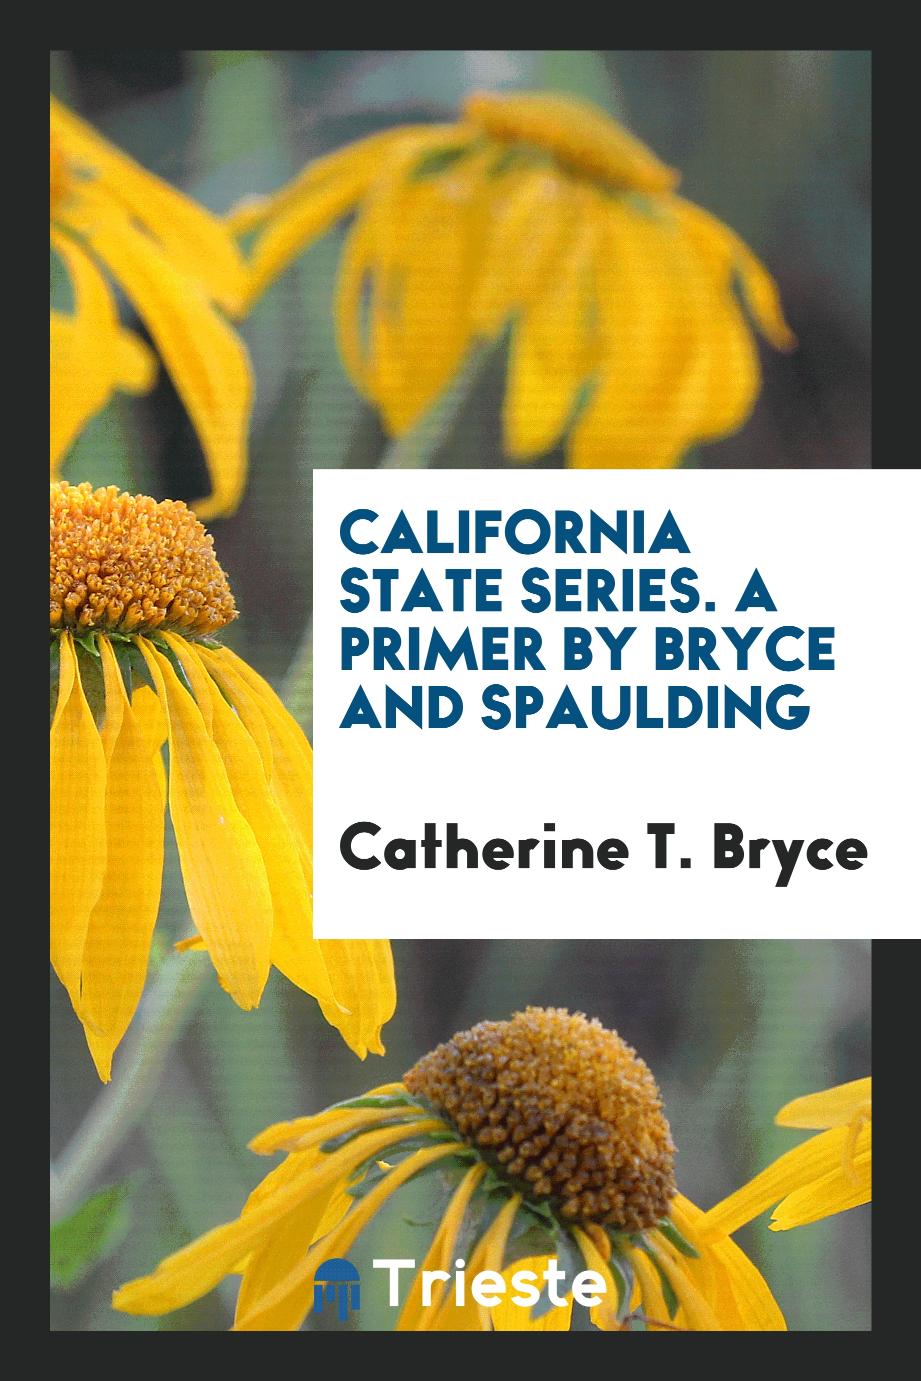 California State Series. A Primer by Bryce and Spaulding